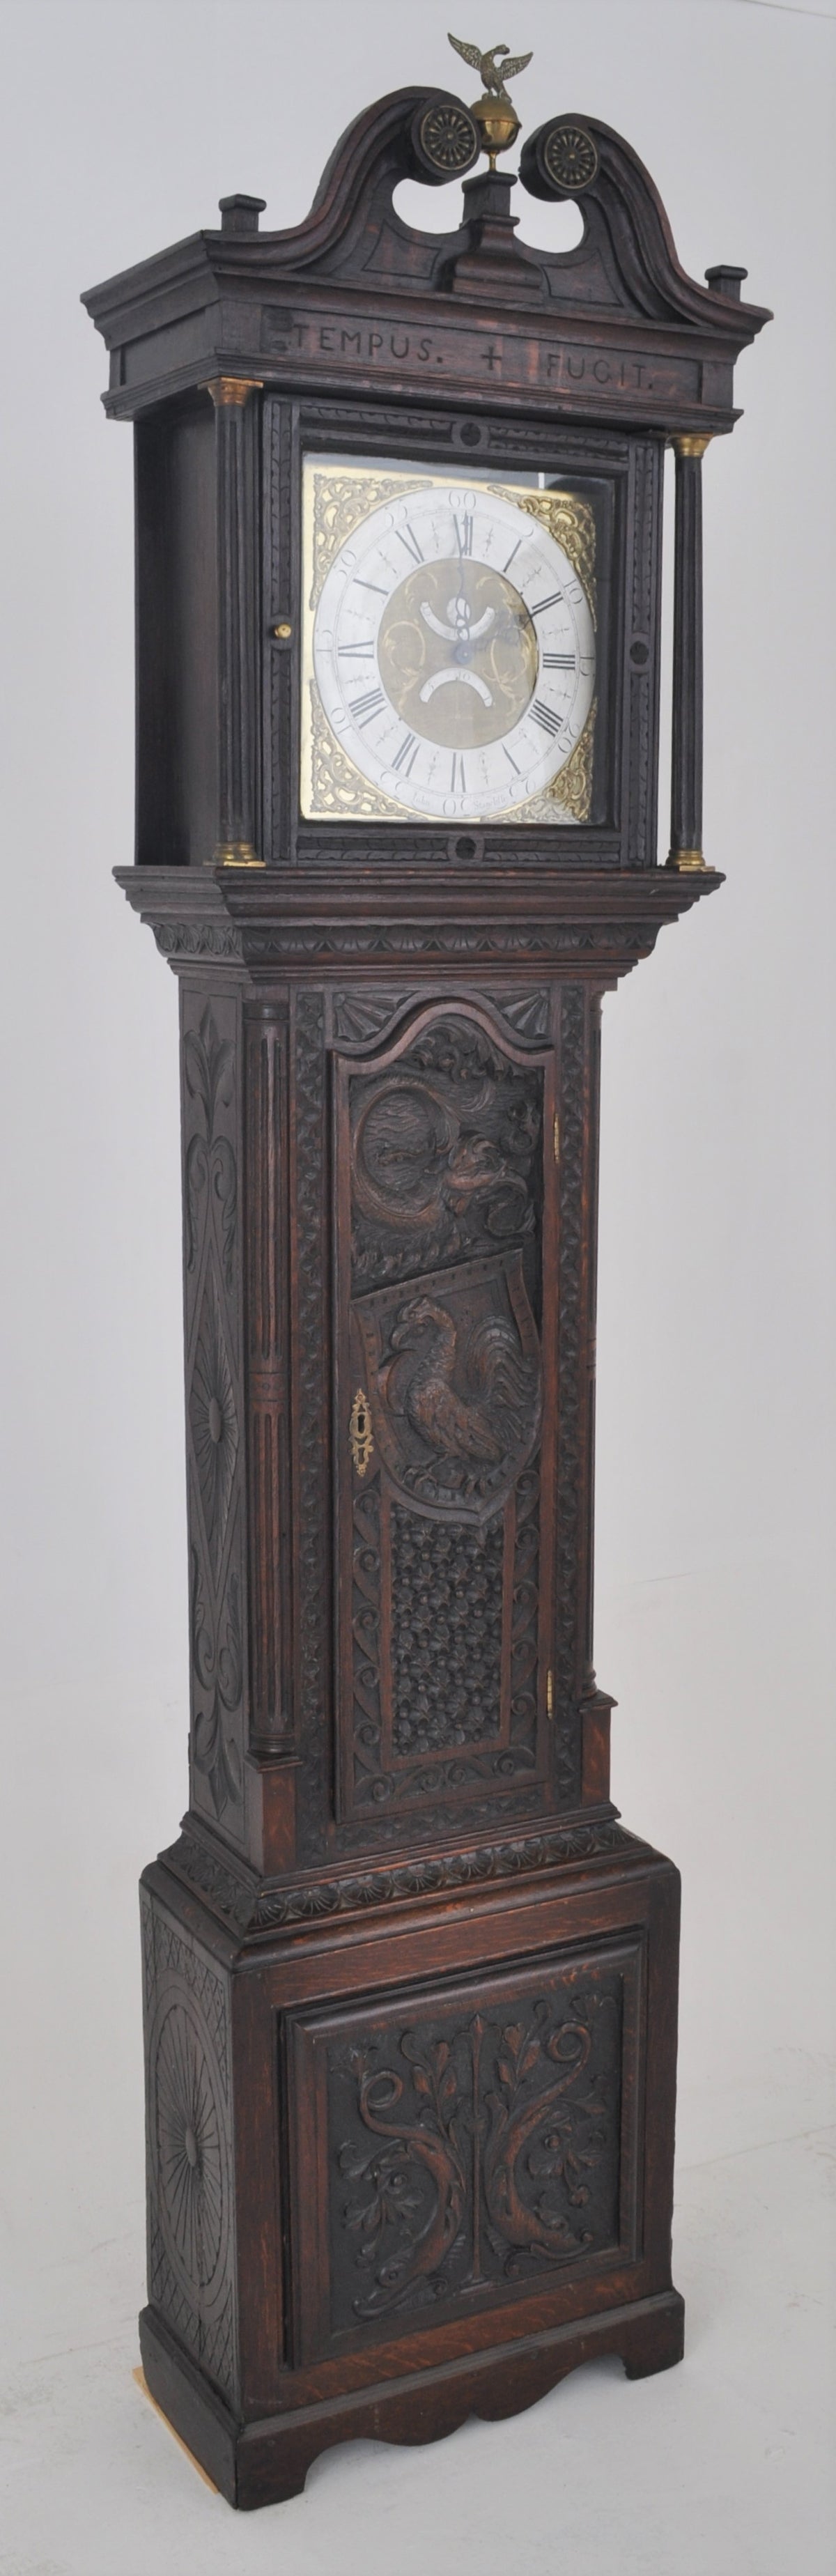 Antique English George III 30-Hour Carved Ebonized Oak Longcase/Grandfather Clock by John Stancliffe of Halifax (1706-1780), Circa 1760